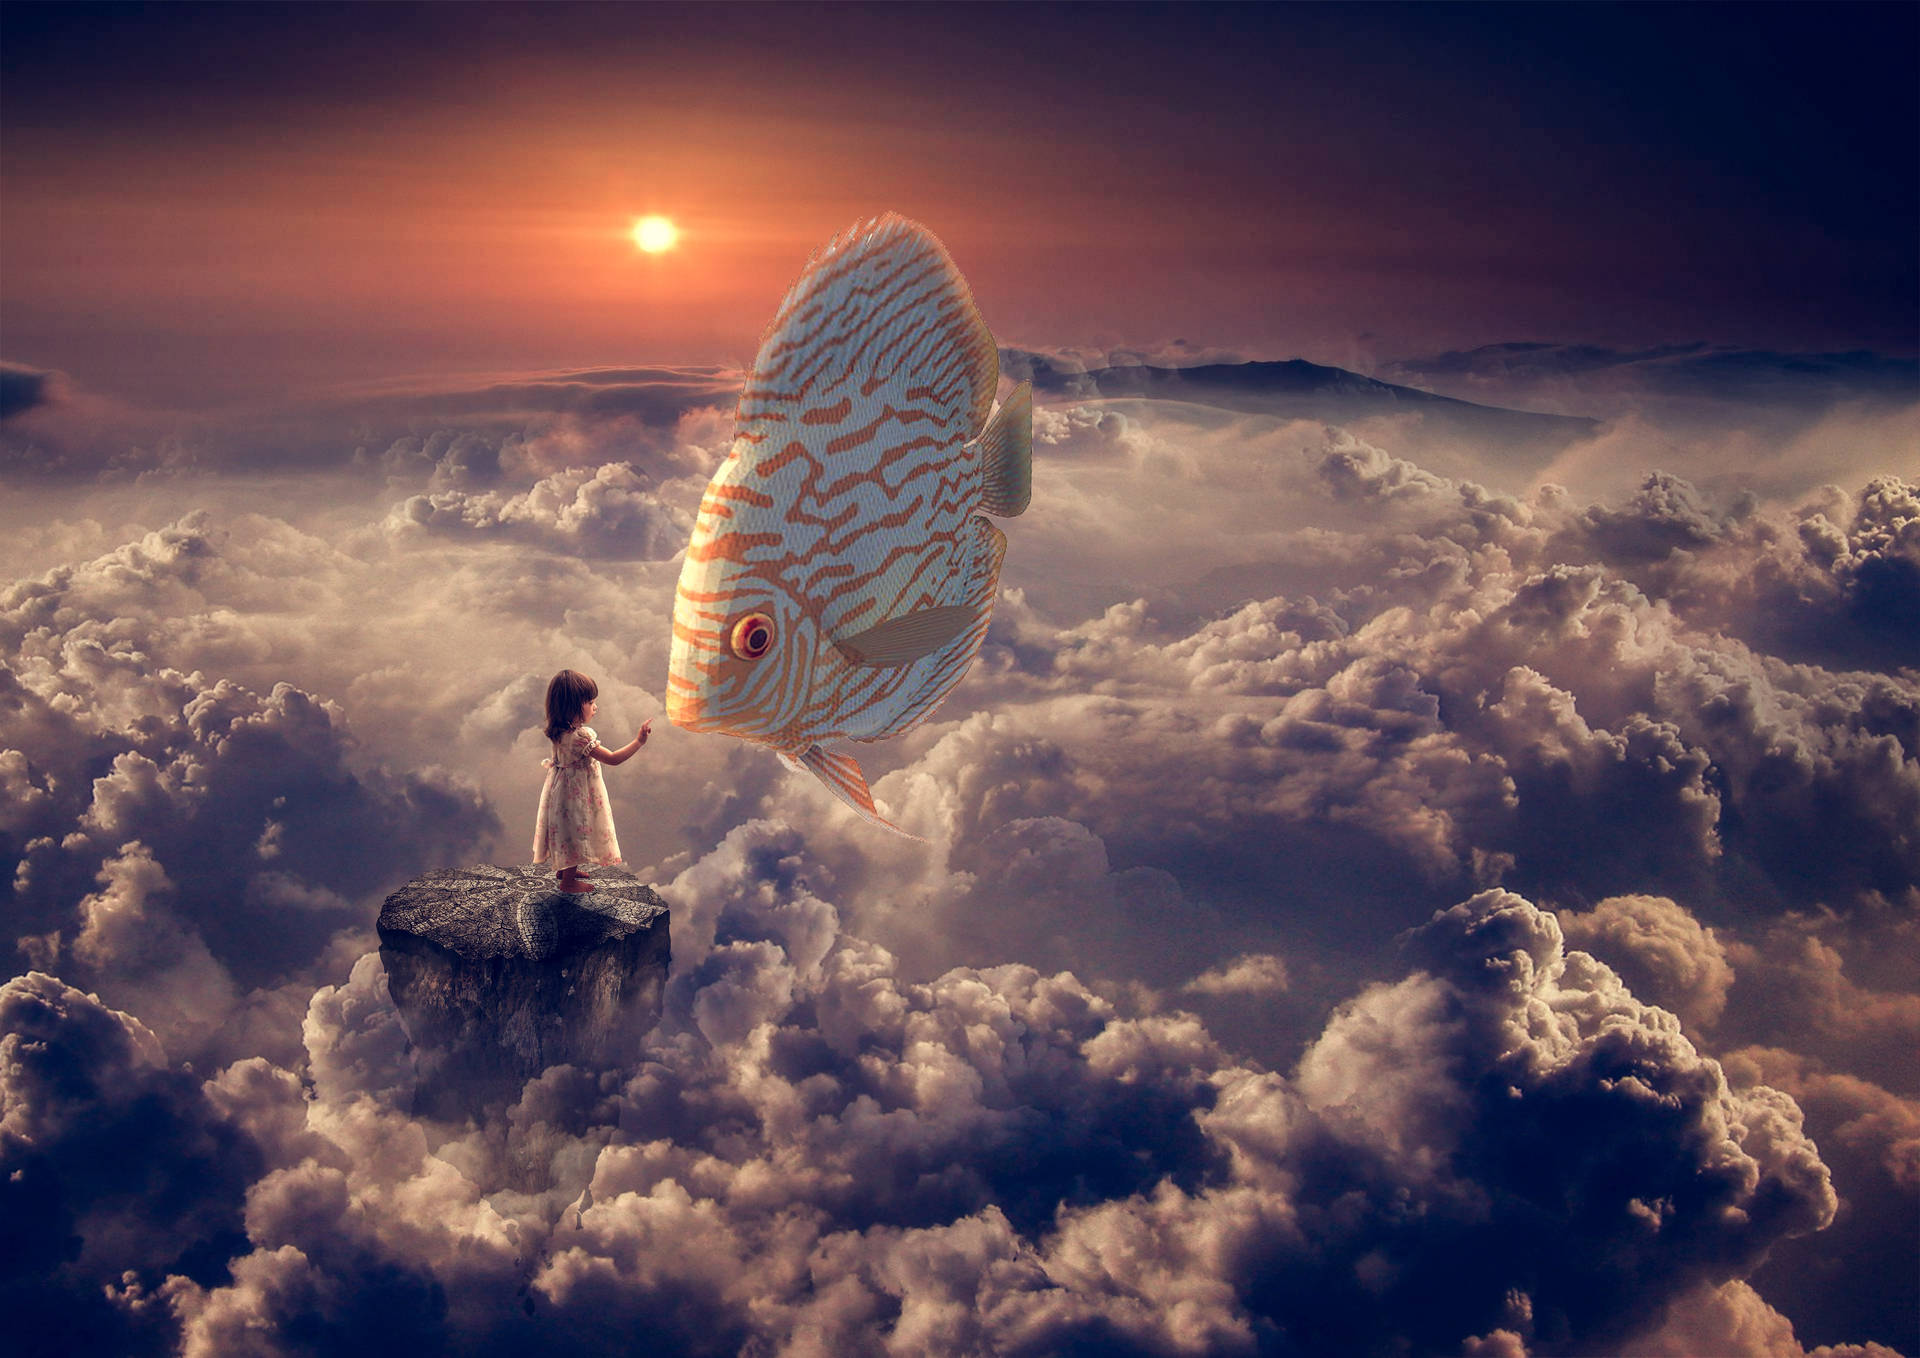 Girl And Fish In Clouds Fantasy